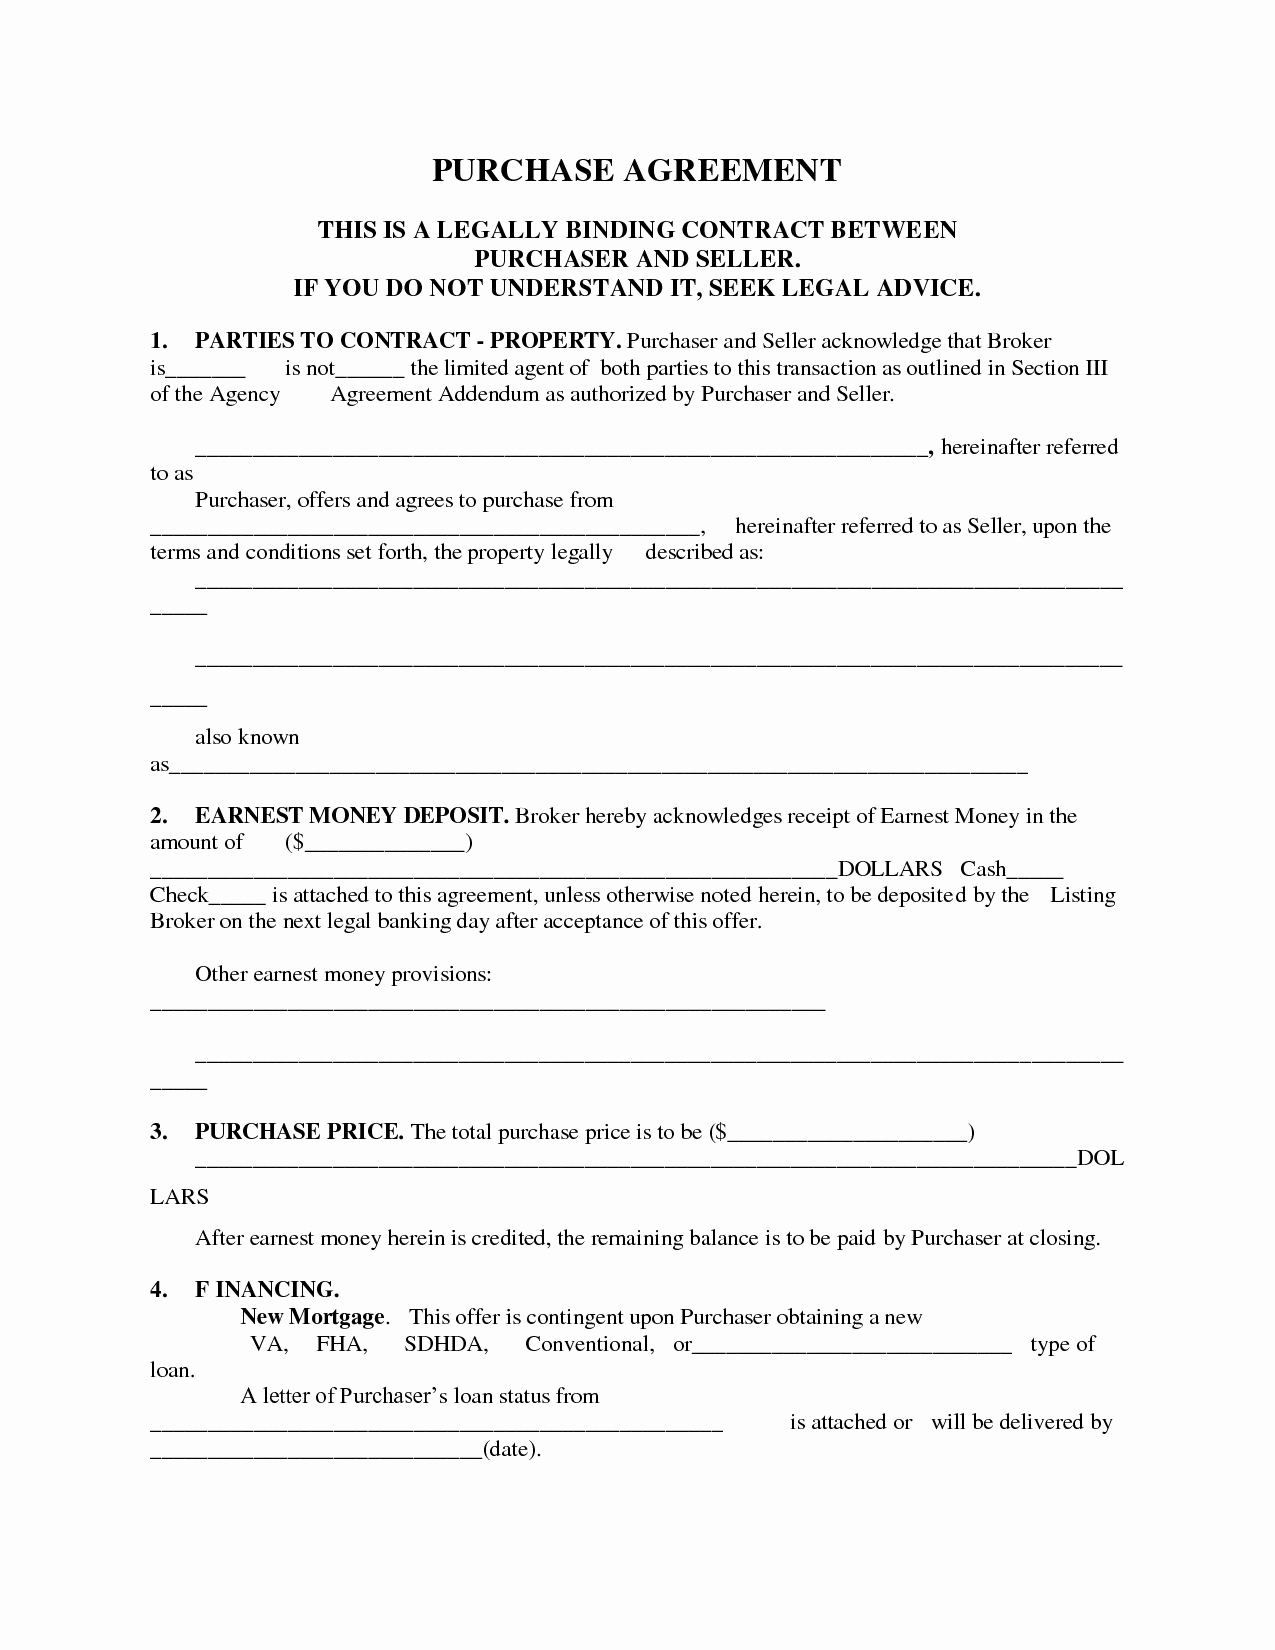 Free Purchase Agreement Template Elegant Printable Home Purchase Agreement